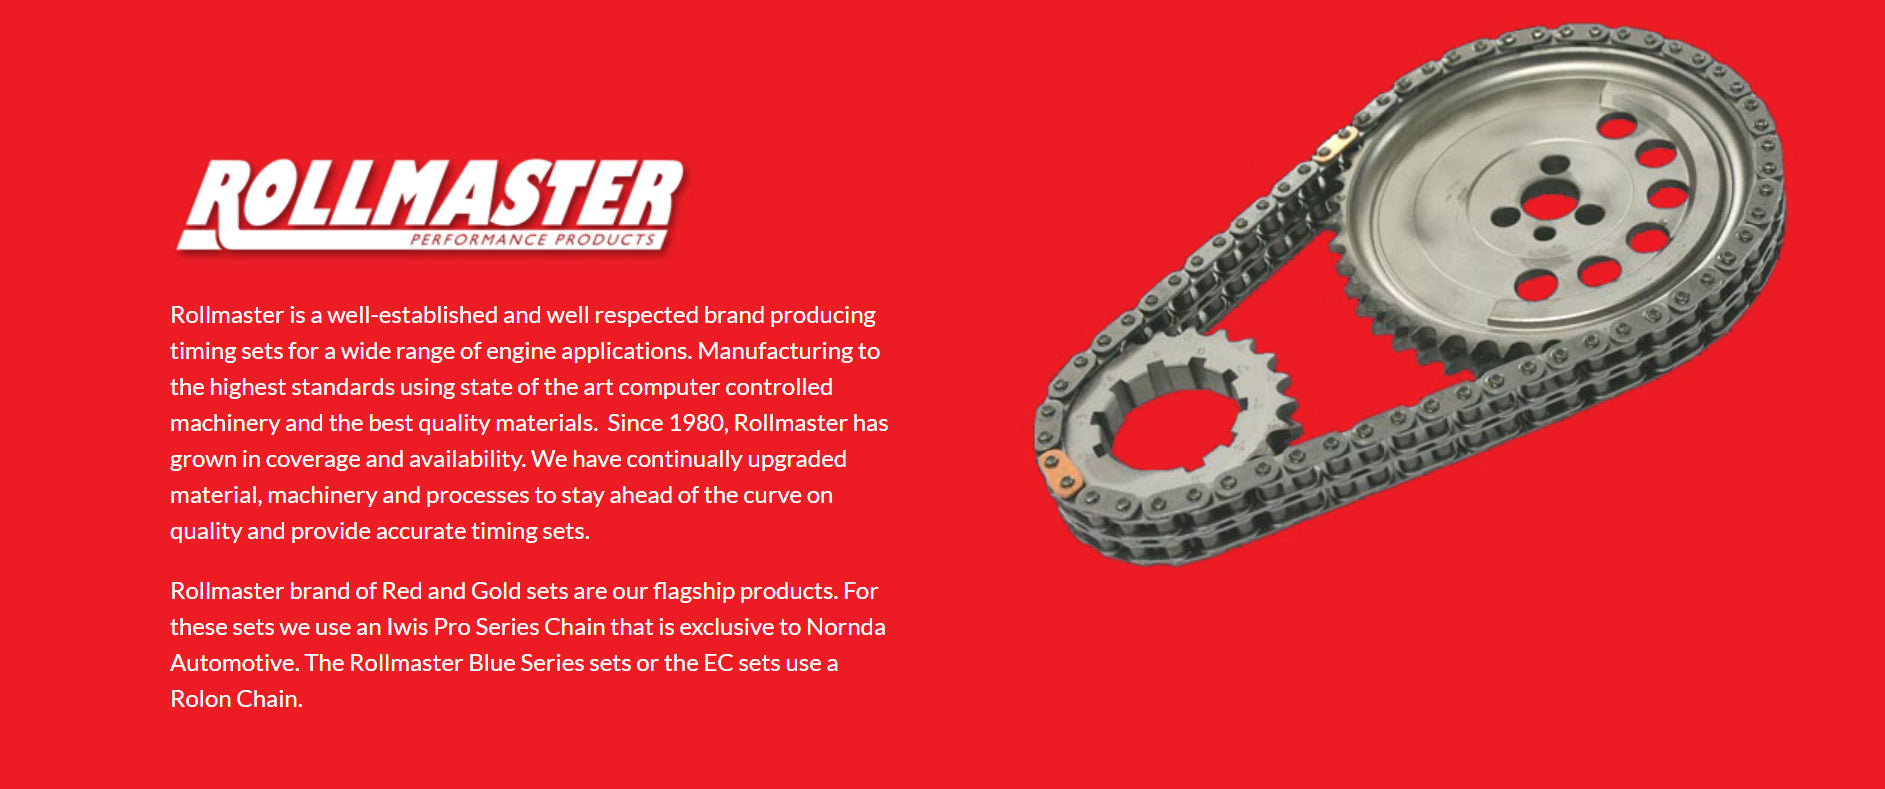 Rollmaster is a well-established and well respected brand producing timing sets for a wide range of engine applications. Manufacturing to the highest standards using state of the art computer controlled machinery and the best quality materials.  Since 1980, Rollmaster has grown in coverage and availability. We have continually upgraded material, machinery and processes to stay ahead of the curve on quality and provide accurate timing sets.  Rollmaster brand of Red and Gold sets are our flagship products. For these sets we use an Iwis Pro Series Chain that is exclusive to Nornda Automotive. The Rollmaster Blue Series sets or the EC sets use a Rolon Chain.